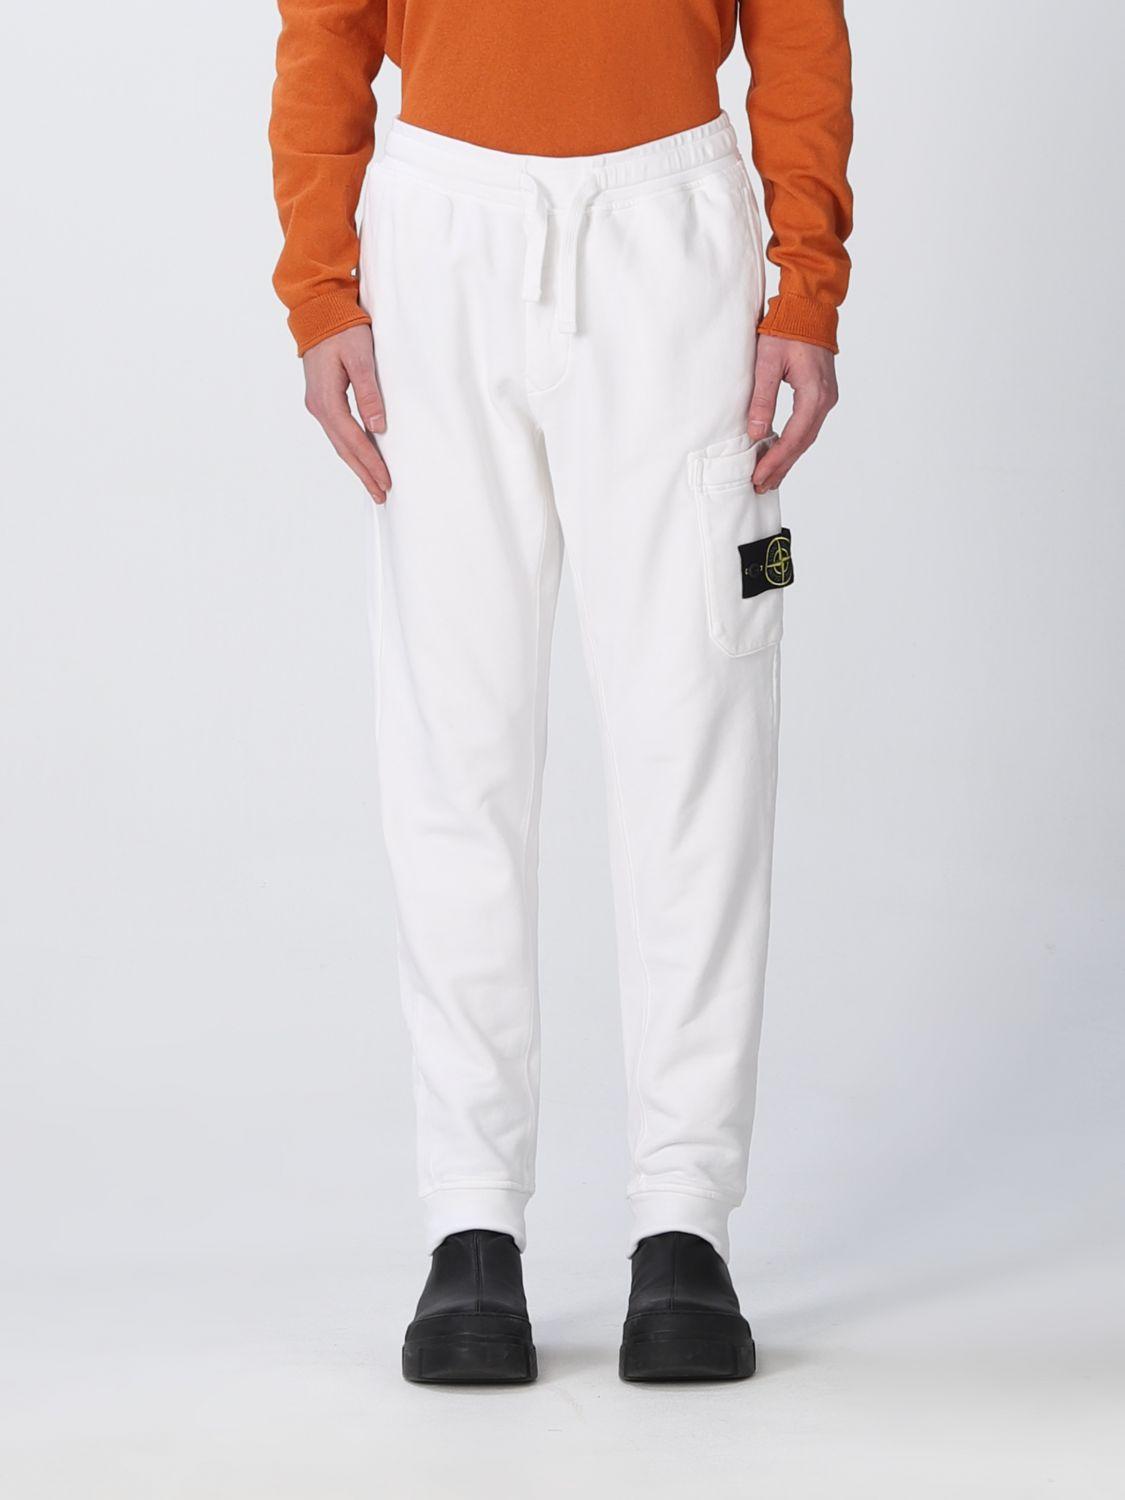 Stone Island Pants in White for Men | Lyst